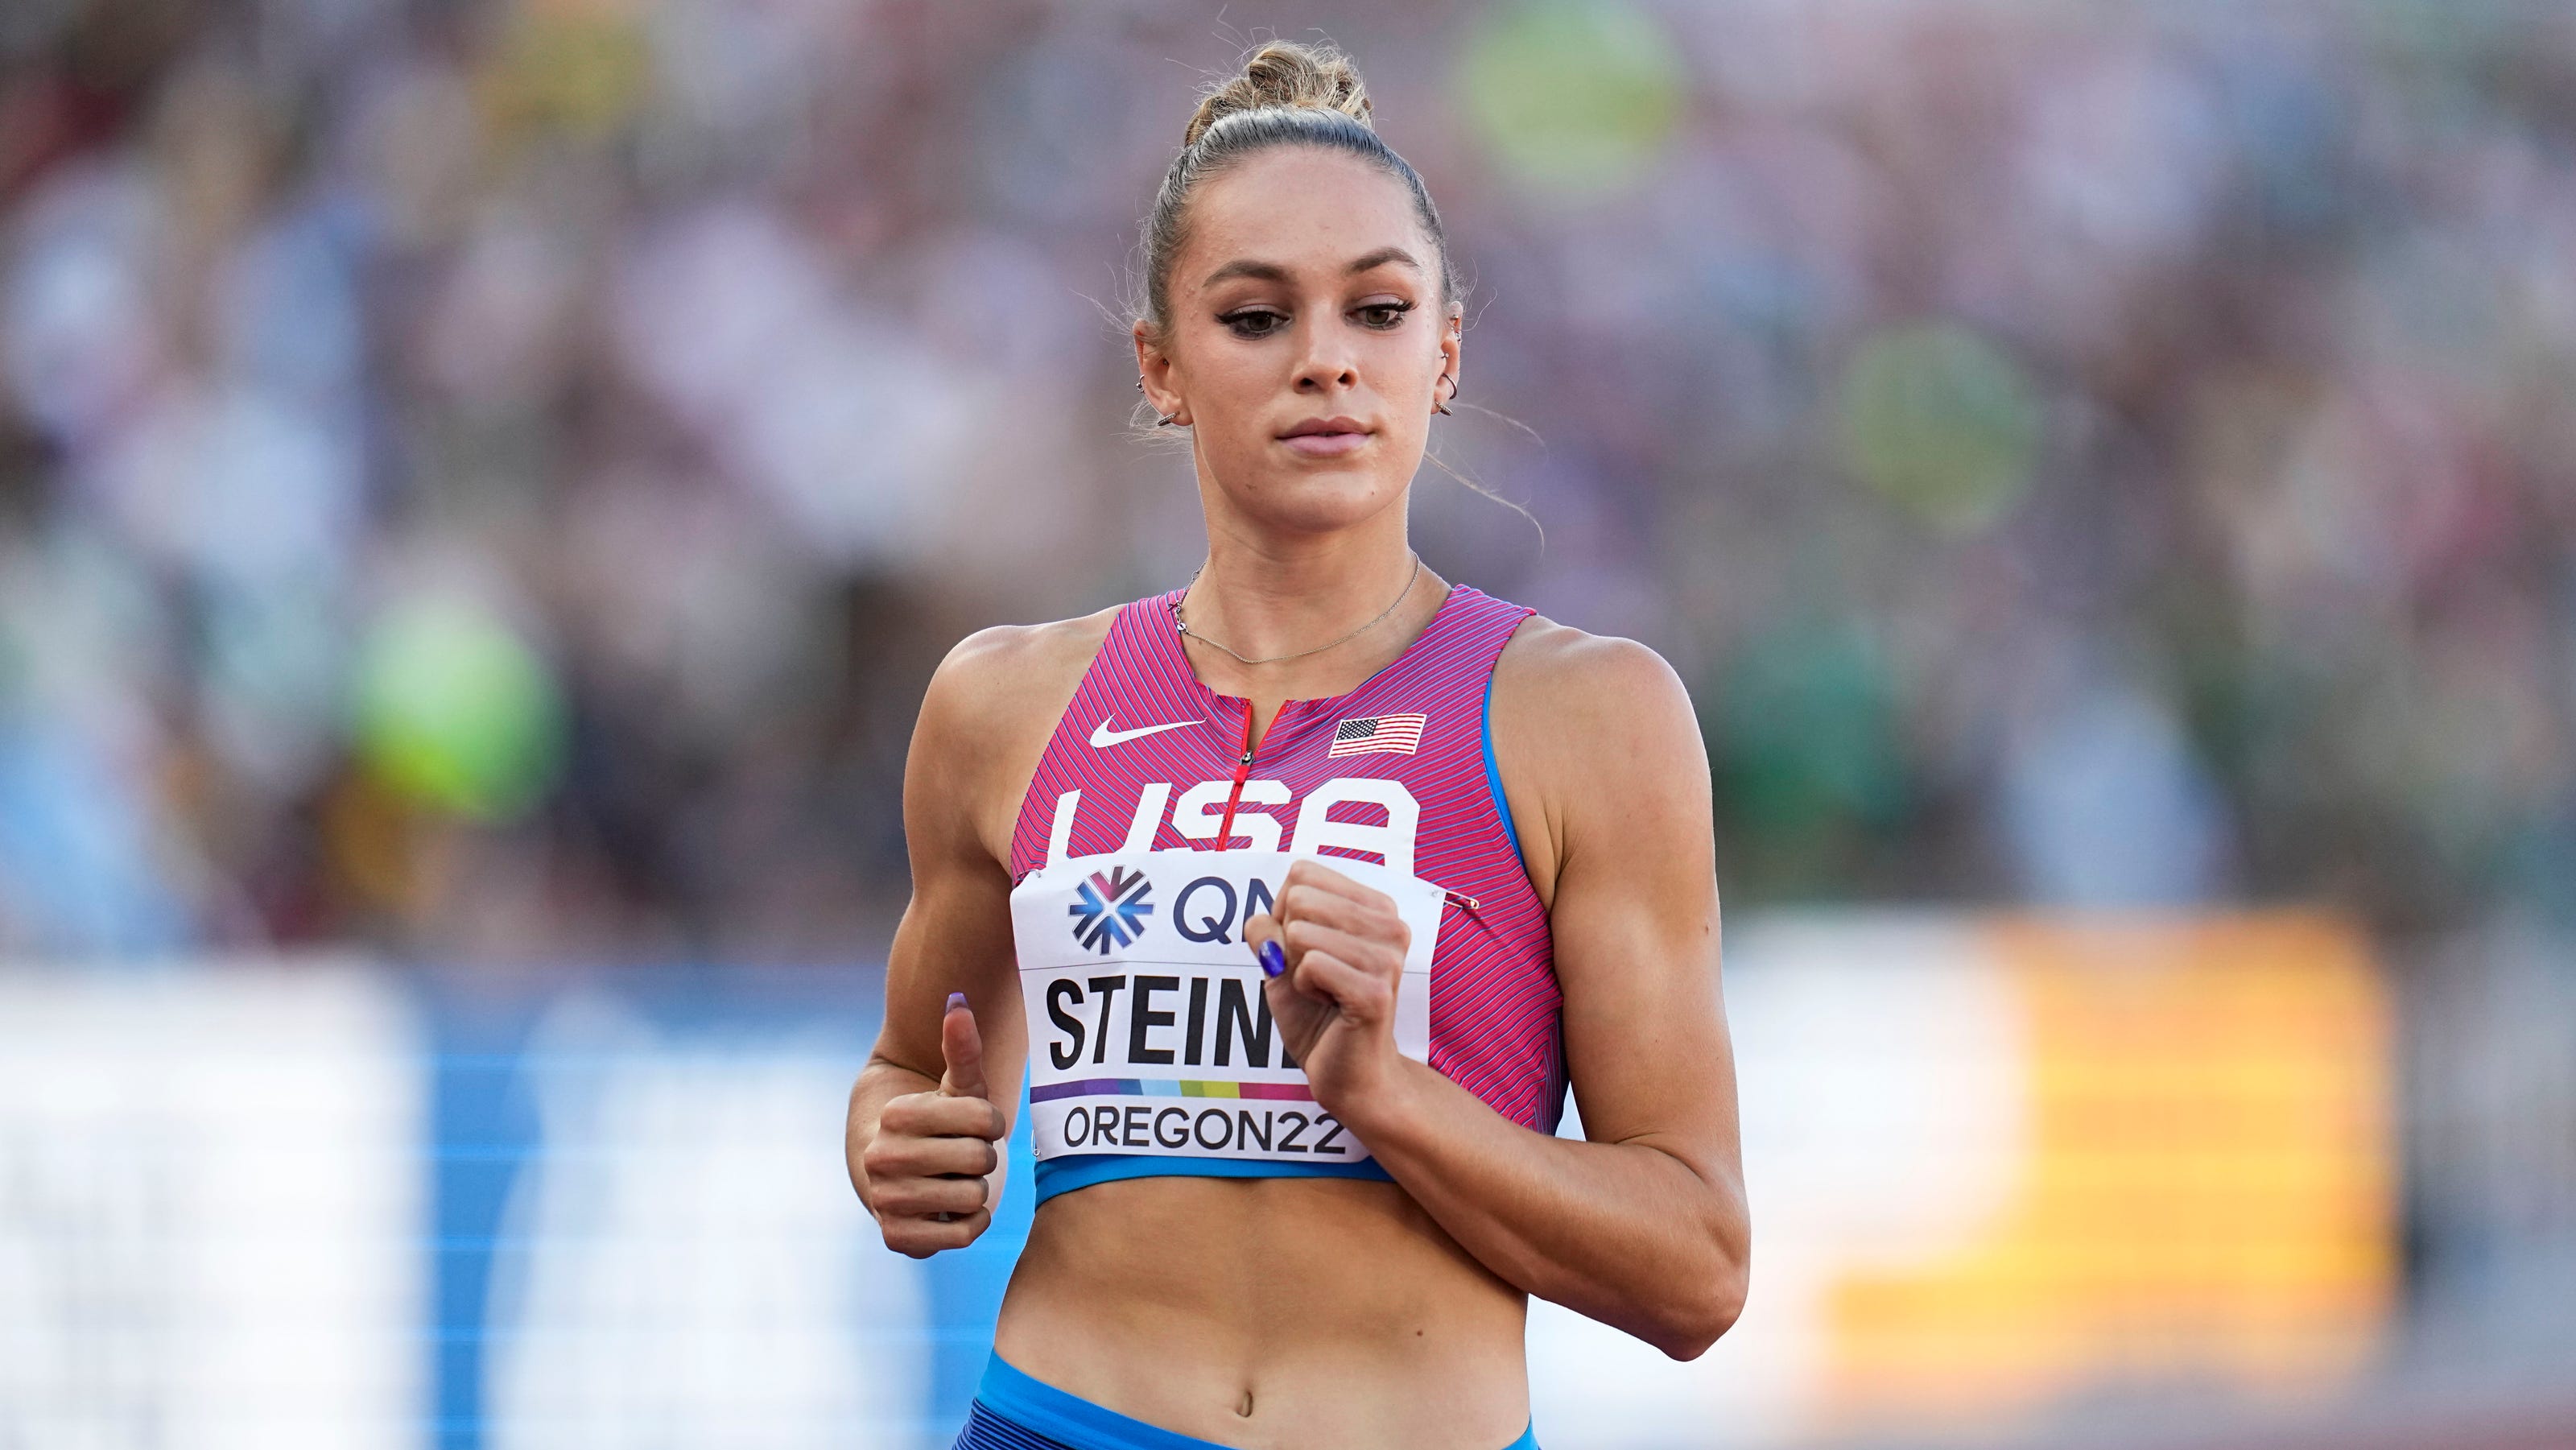 Abby Steiner competing in 200meter finals at World Championships